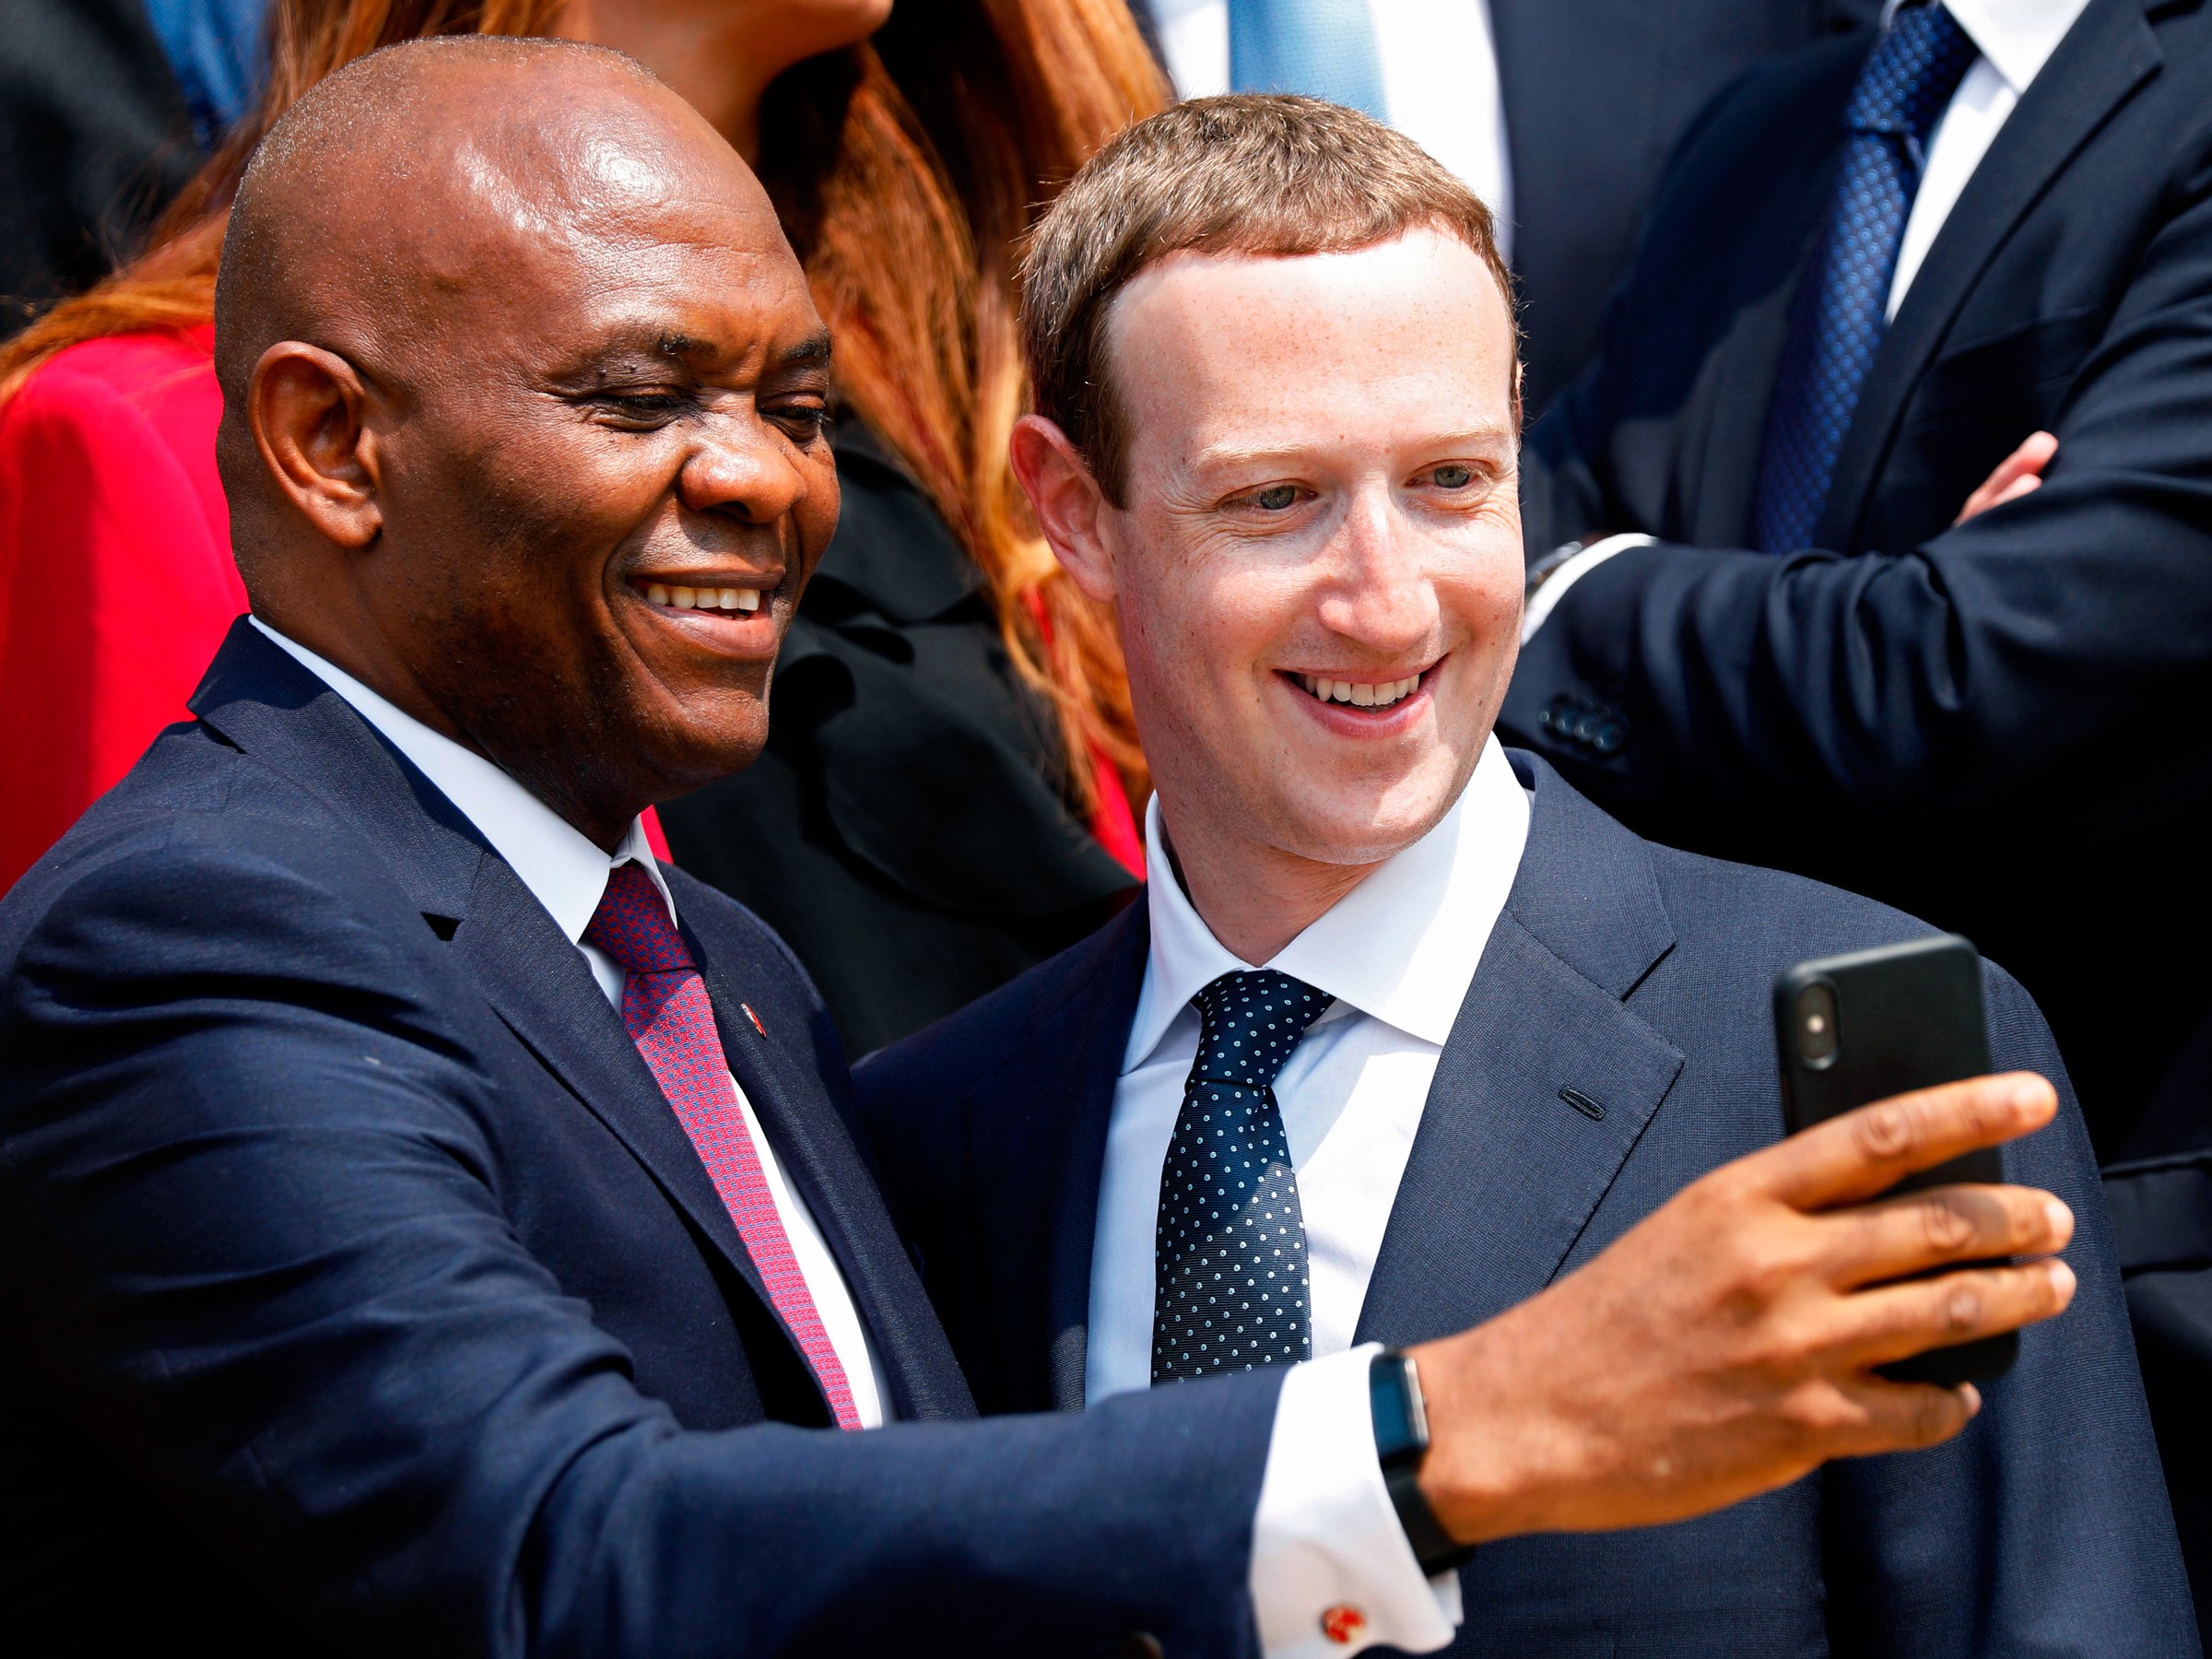 Facebook suspends “Russian fake accounts” for meddling in African countries